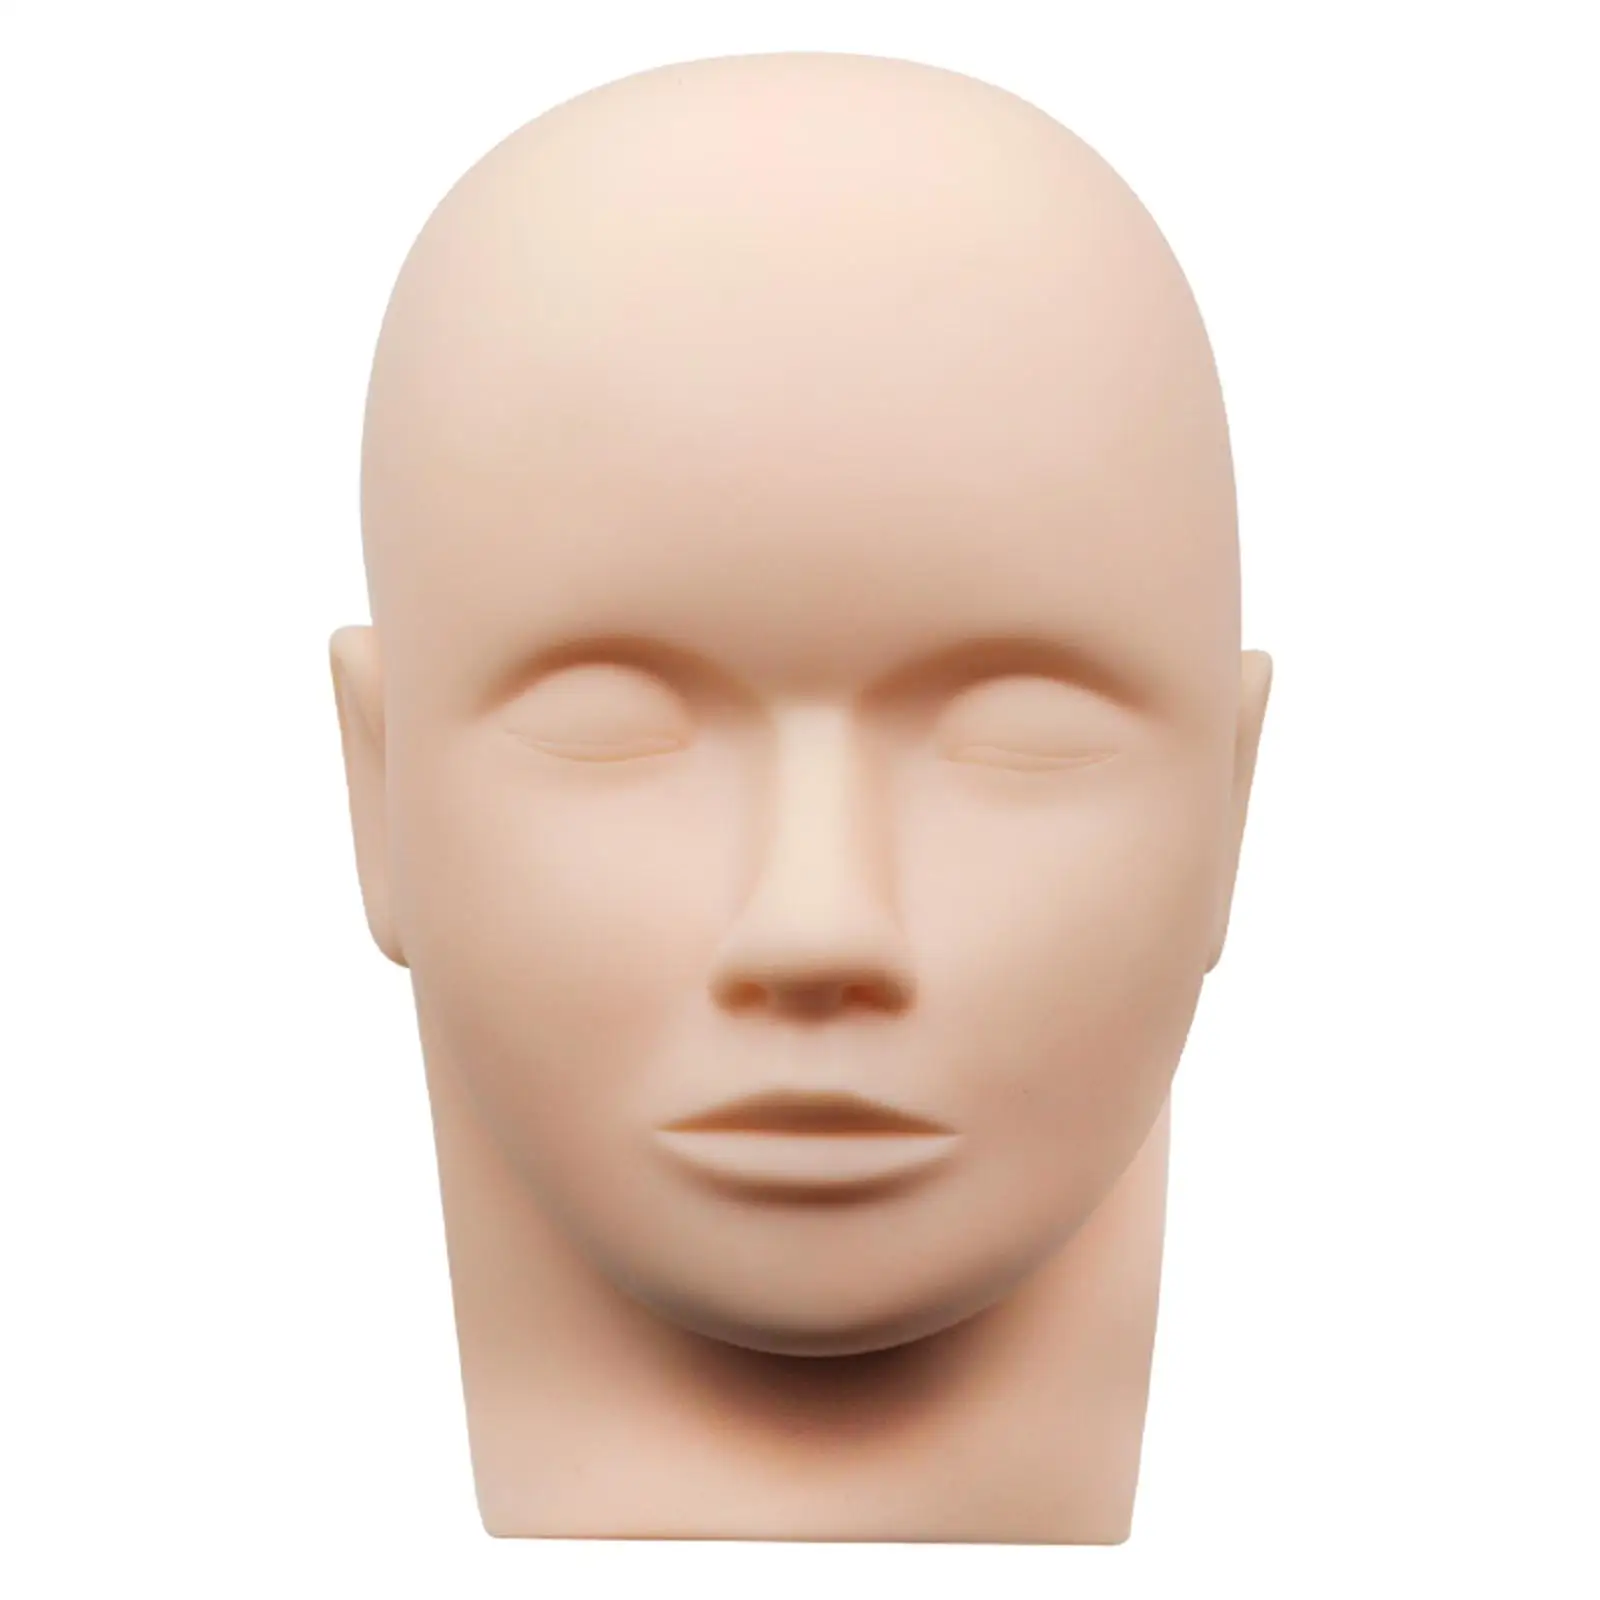 Eyelash Silicone Head Mold Practice Head Lash Extension Supplies Soft Touch Mannequin Training Practice Make up